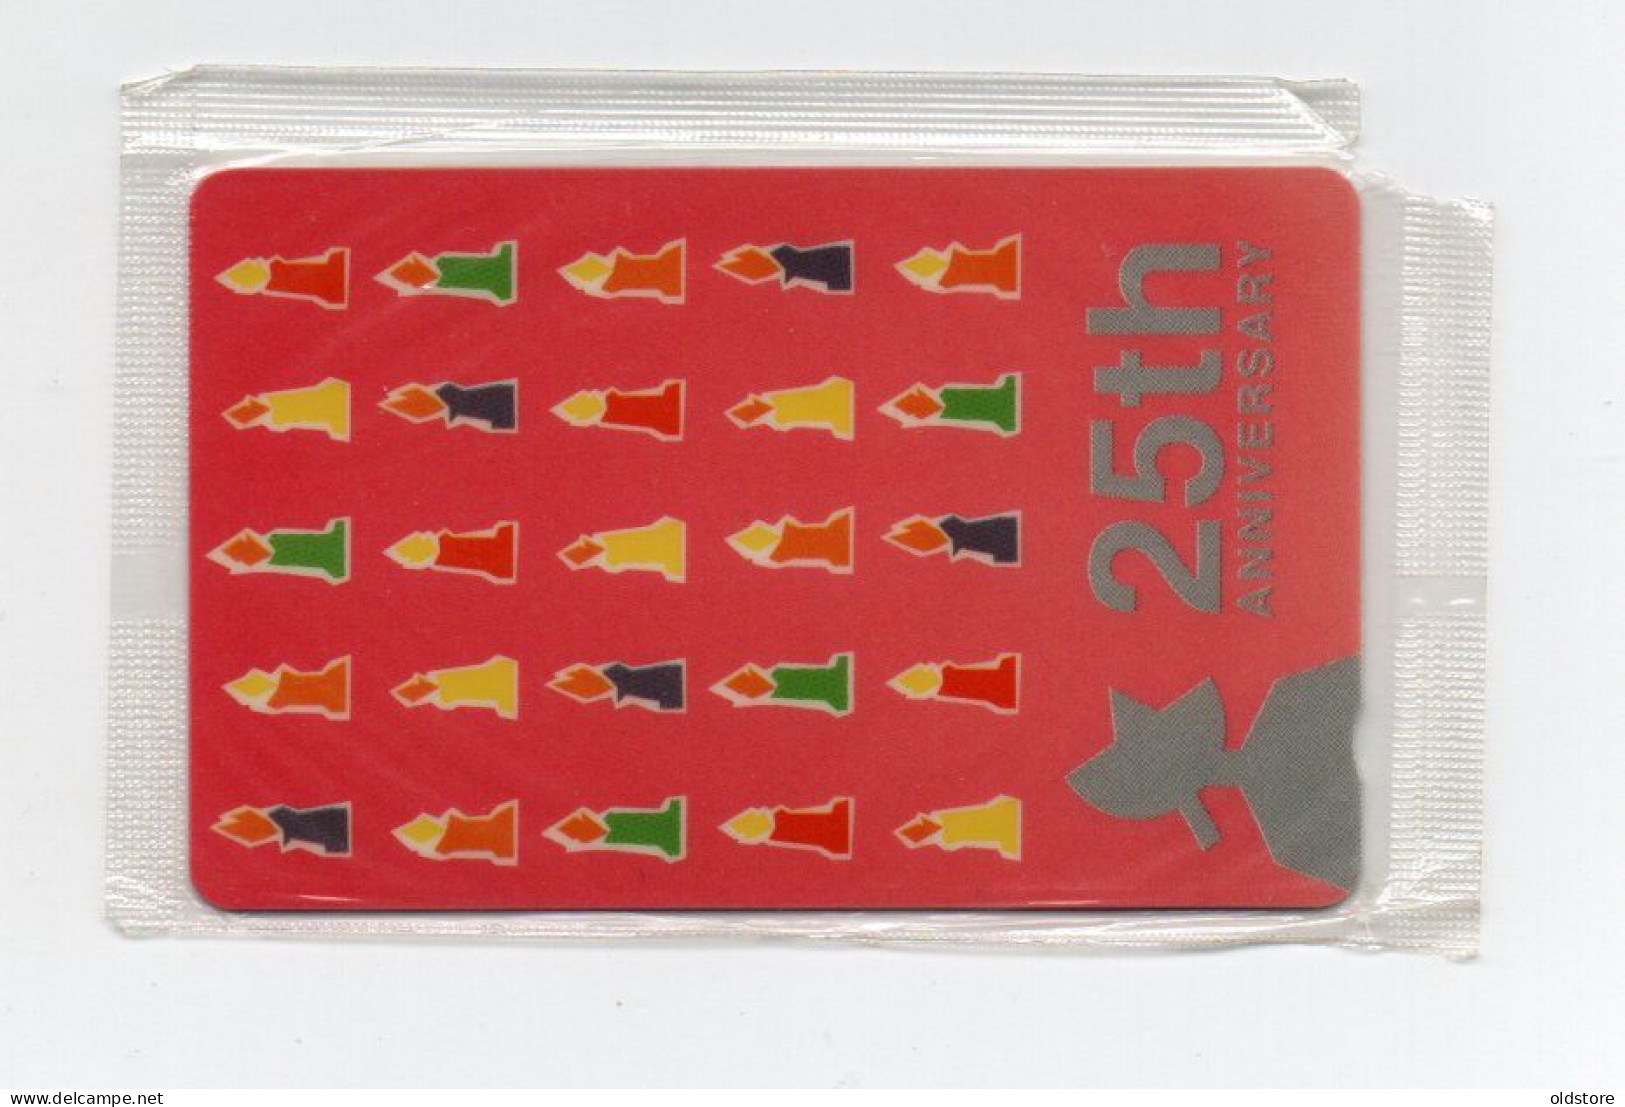 Bahrain Phonecards -25th Anniversary Of Satellite Communications (Red) - Mint Card - ND 1994 - Bahrein